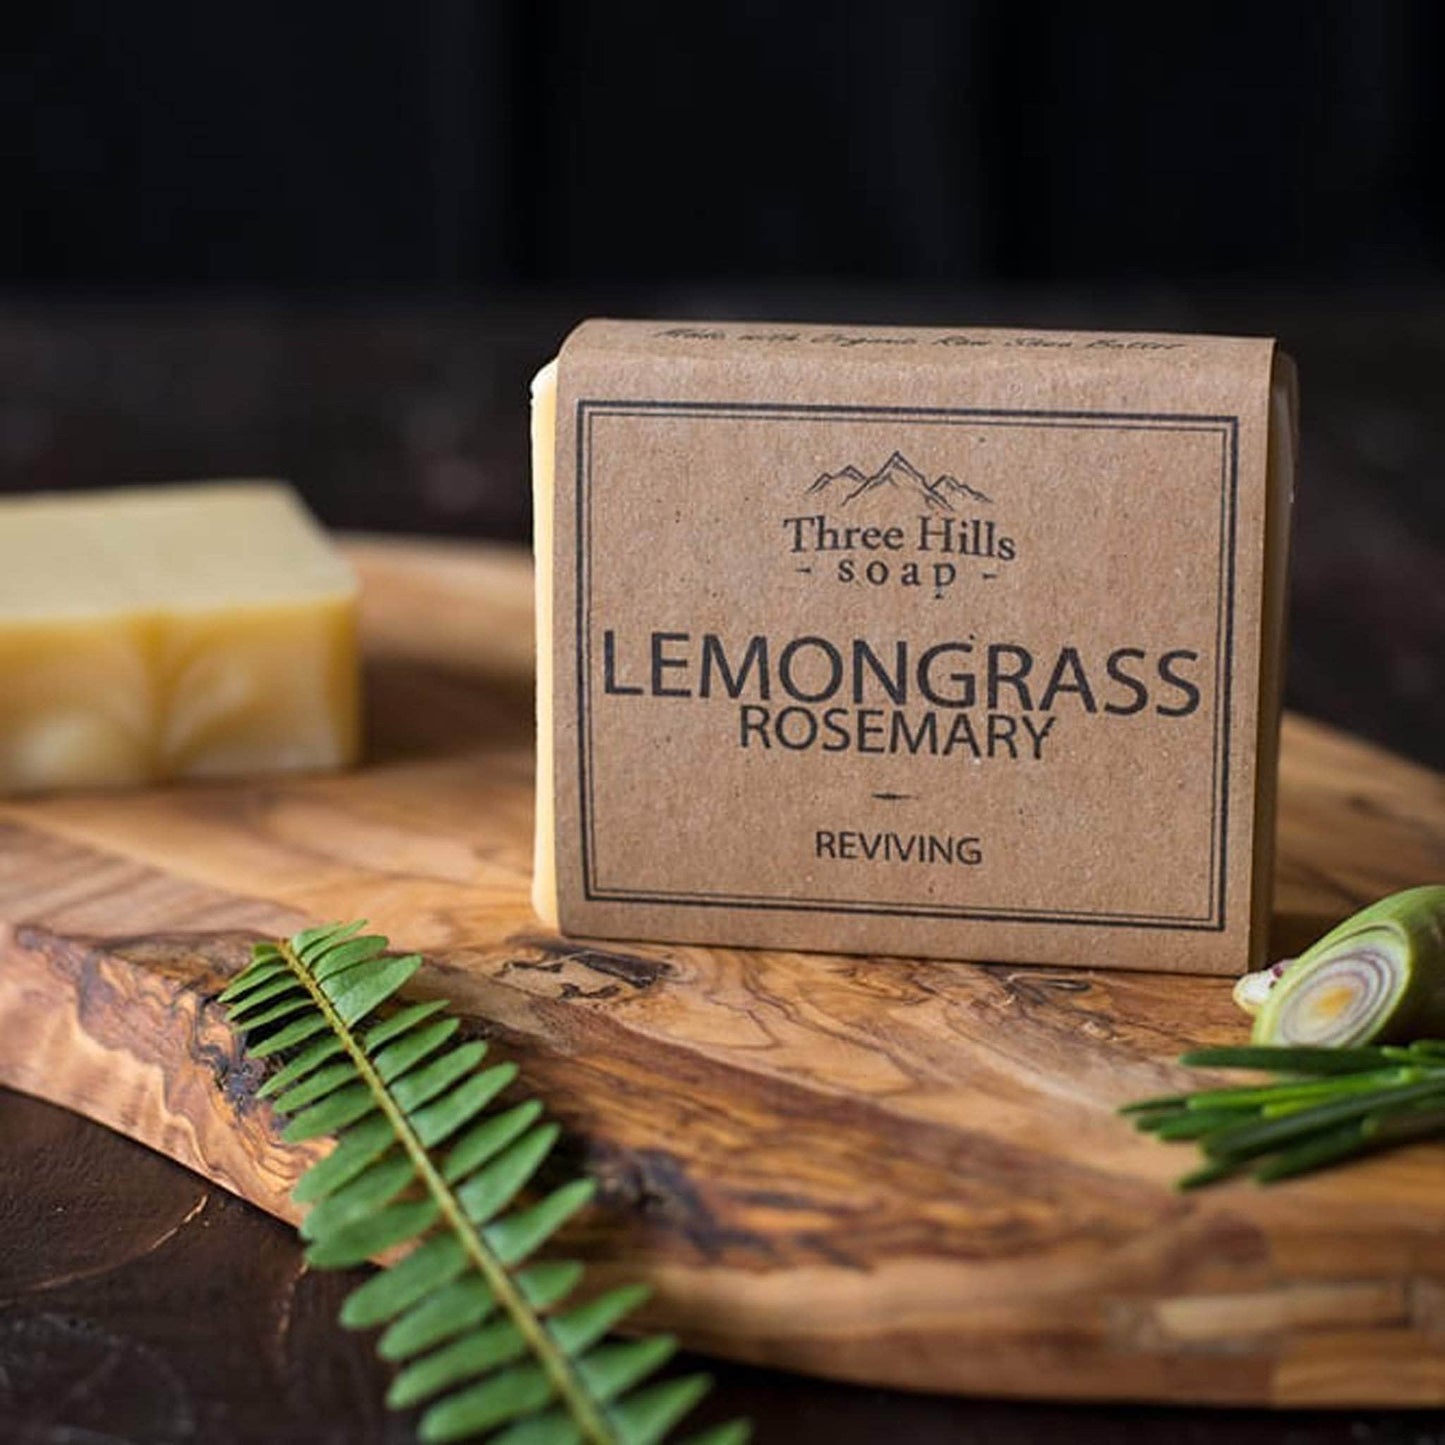 Load image into Gallery viewer, Three Hill Soaps Soap Three Hills Lemongrass Rosemary Soap
